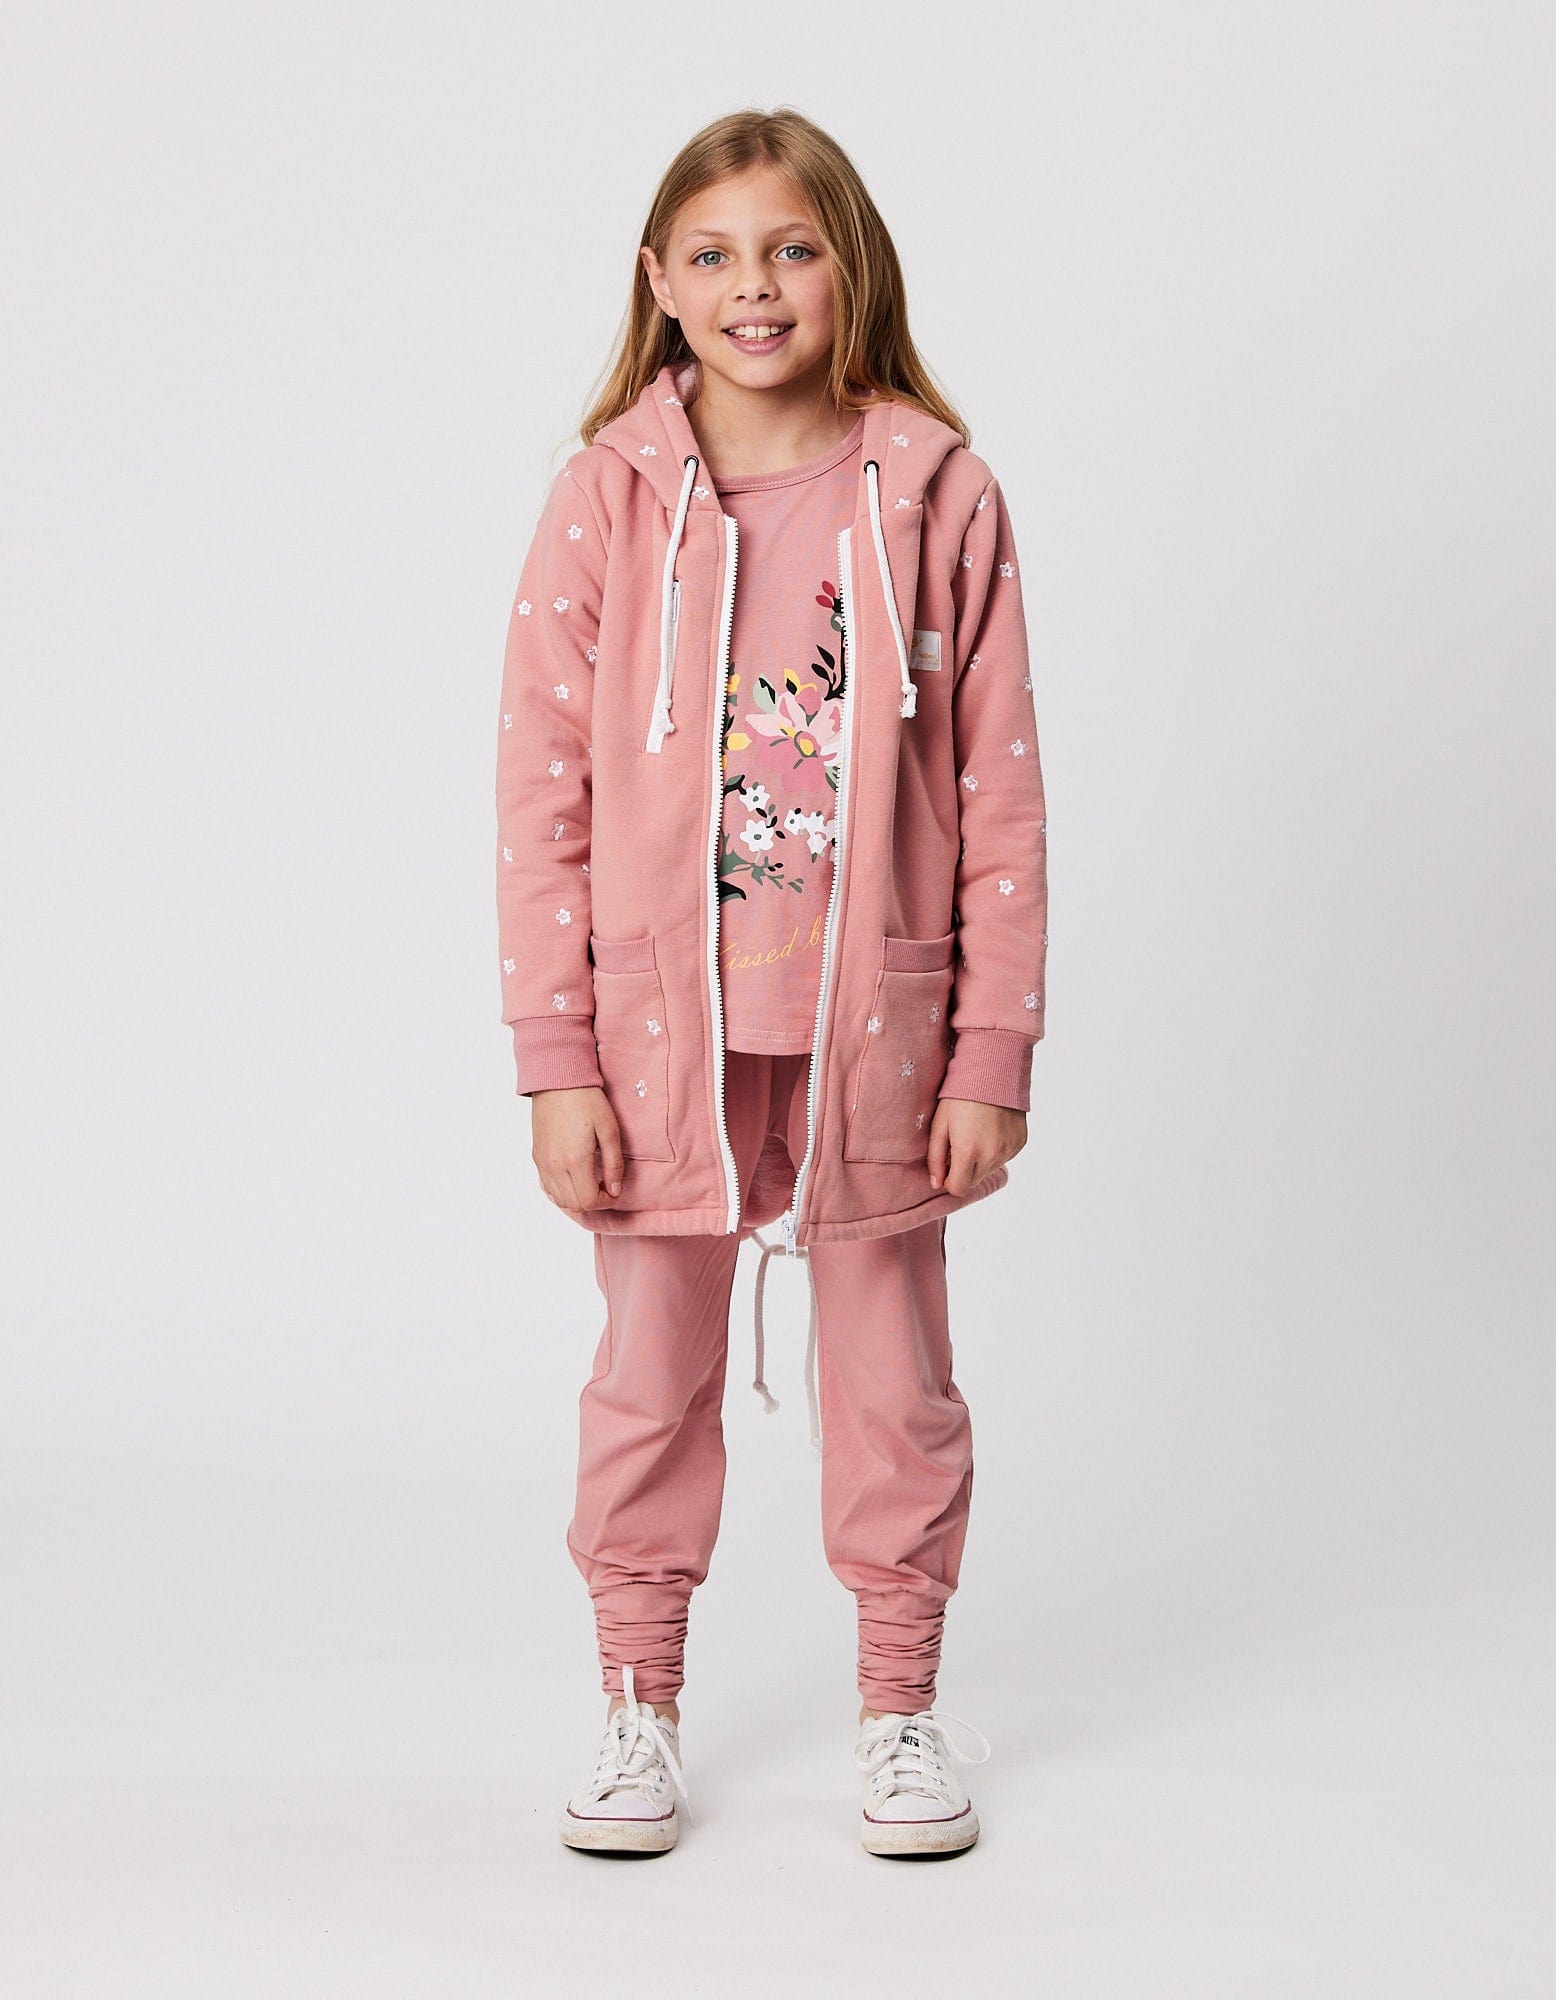 Kissed By Radicool Girls Pant Slouch Pant in Blush